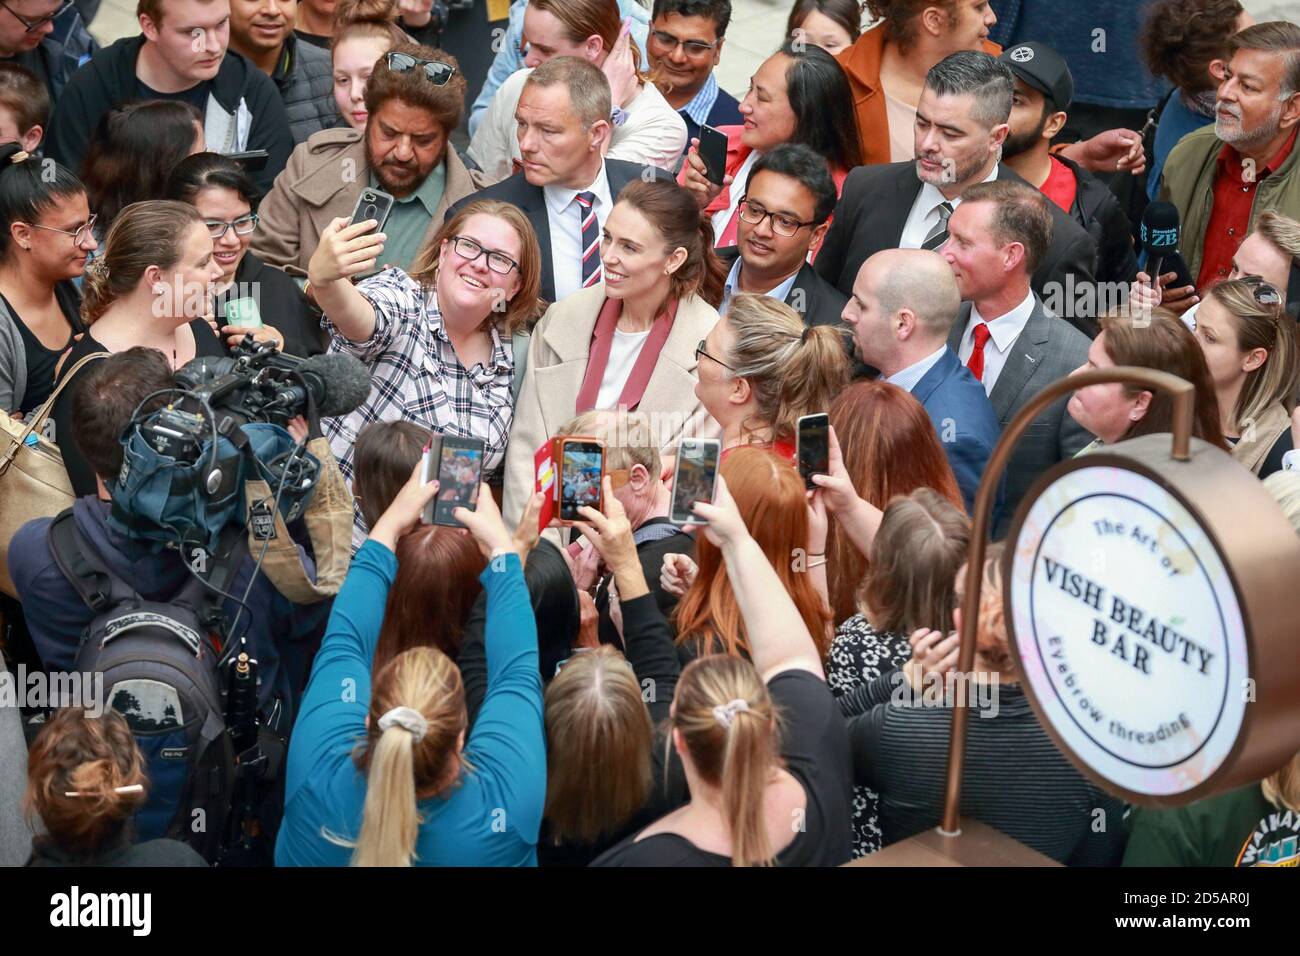 Hamilton, New Zealand. 12th Oct, 2020. New Zealand Prime Minister and Labour Party leader Jacinda Ardern makes a selfie with her supporters during an election campaign held in Hamilton, New Zealand, Oct. 12, 2020. The election day of the 2020 General Election and referendums will fall on Oct. 17. Credit: Zhu Xi/Xinhua/Alamy Live News Stock Photo